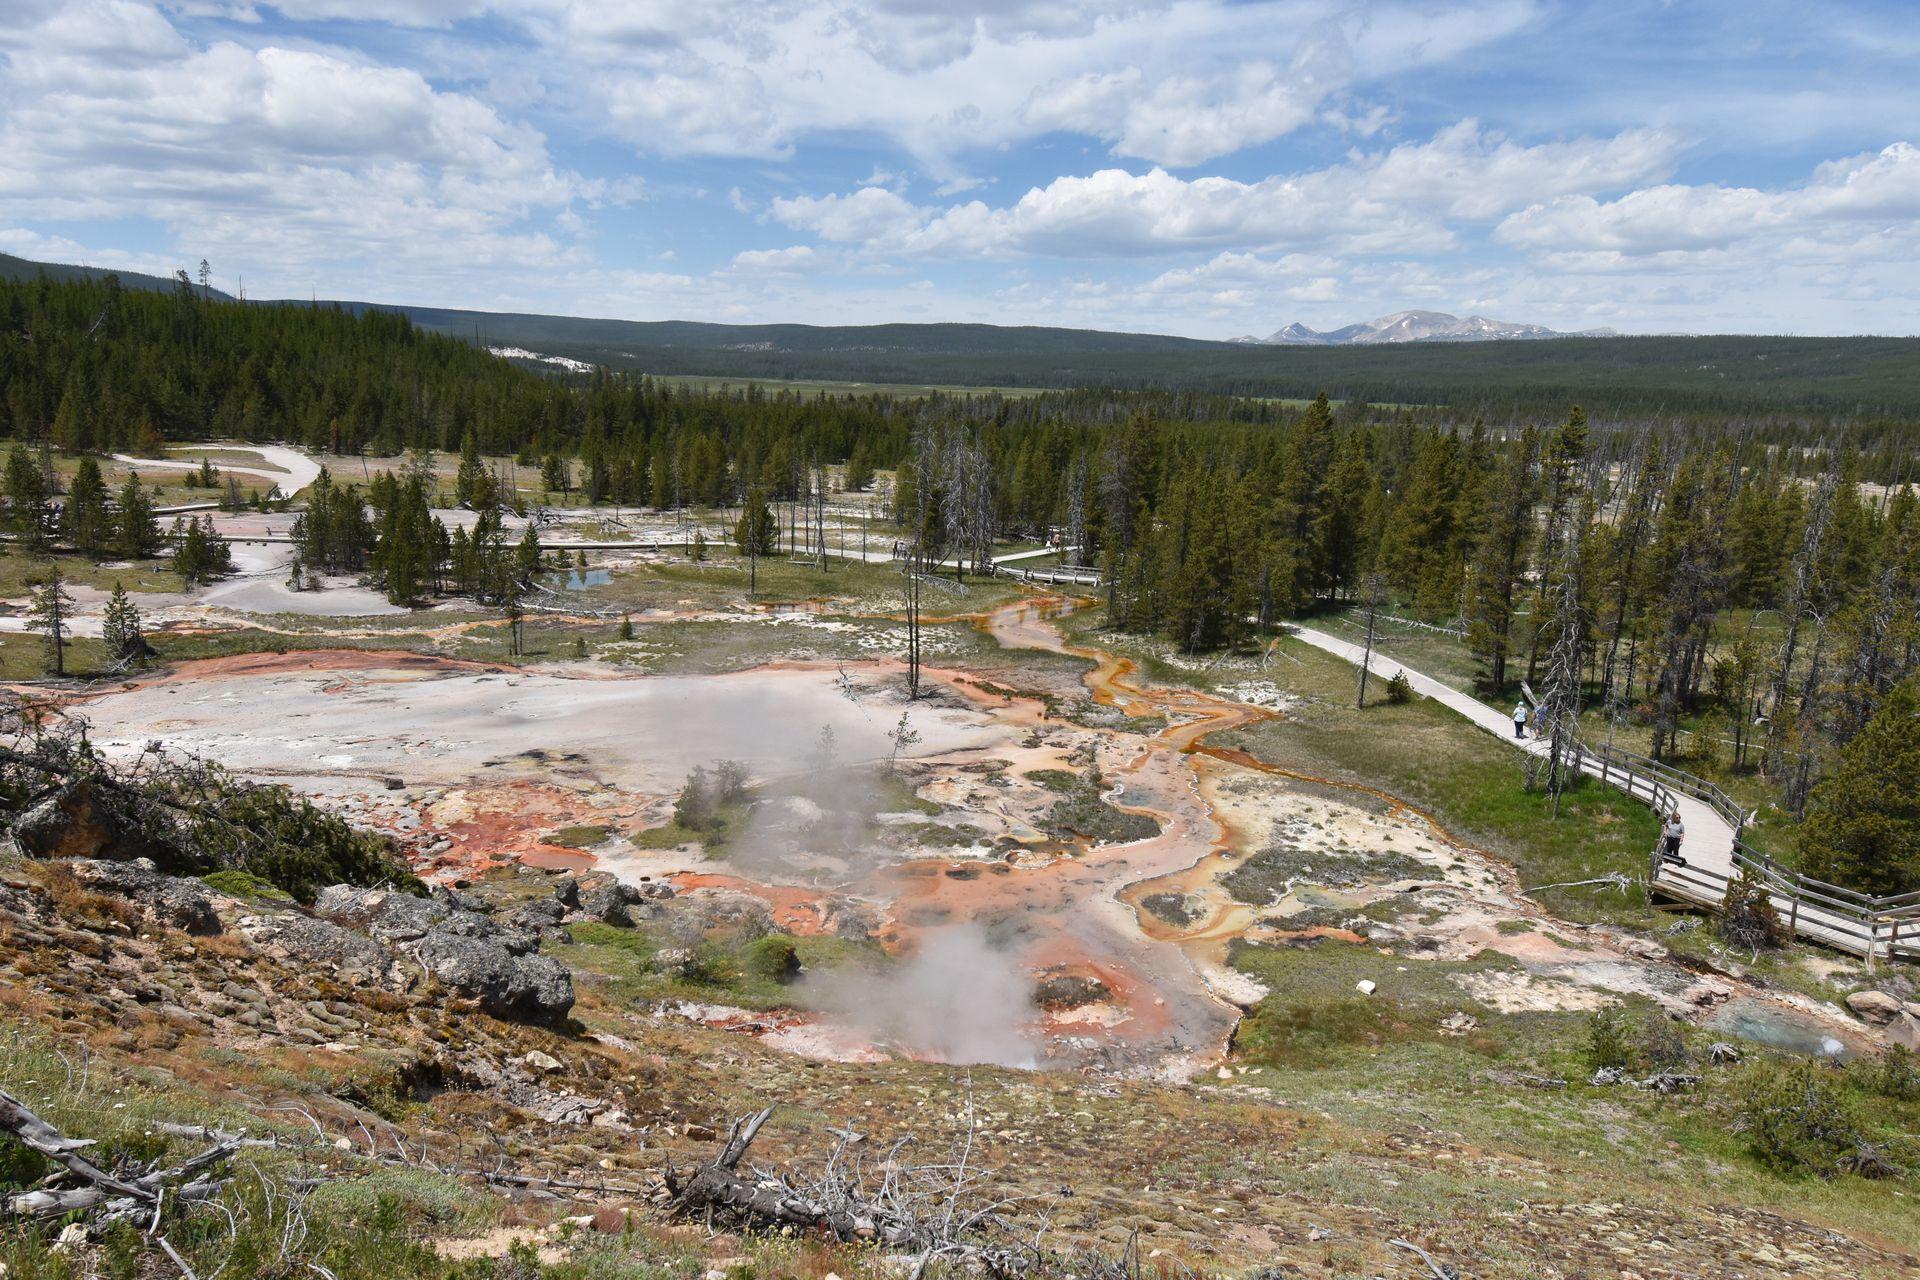 Looking down at orange hot springs in the Artist's Paintpots area.